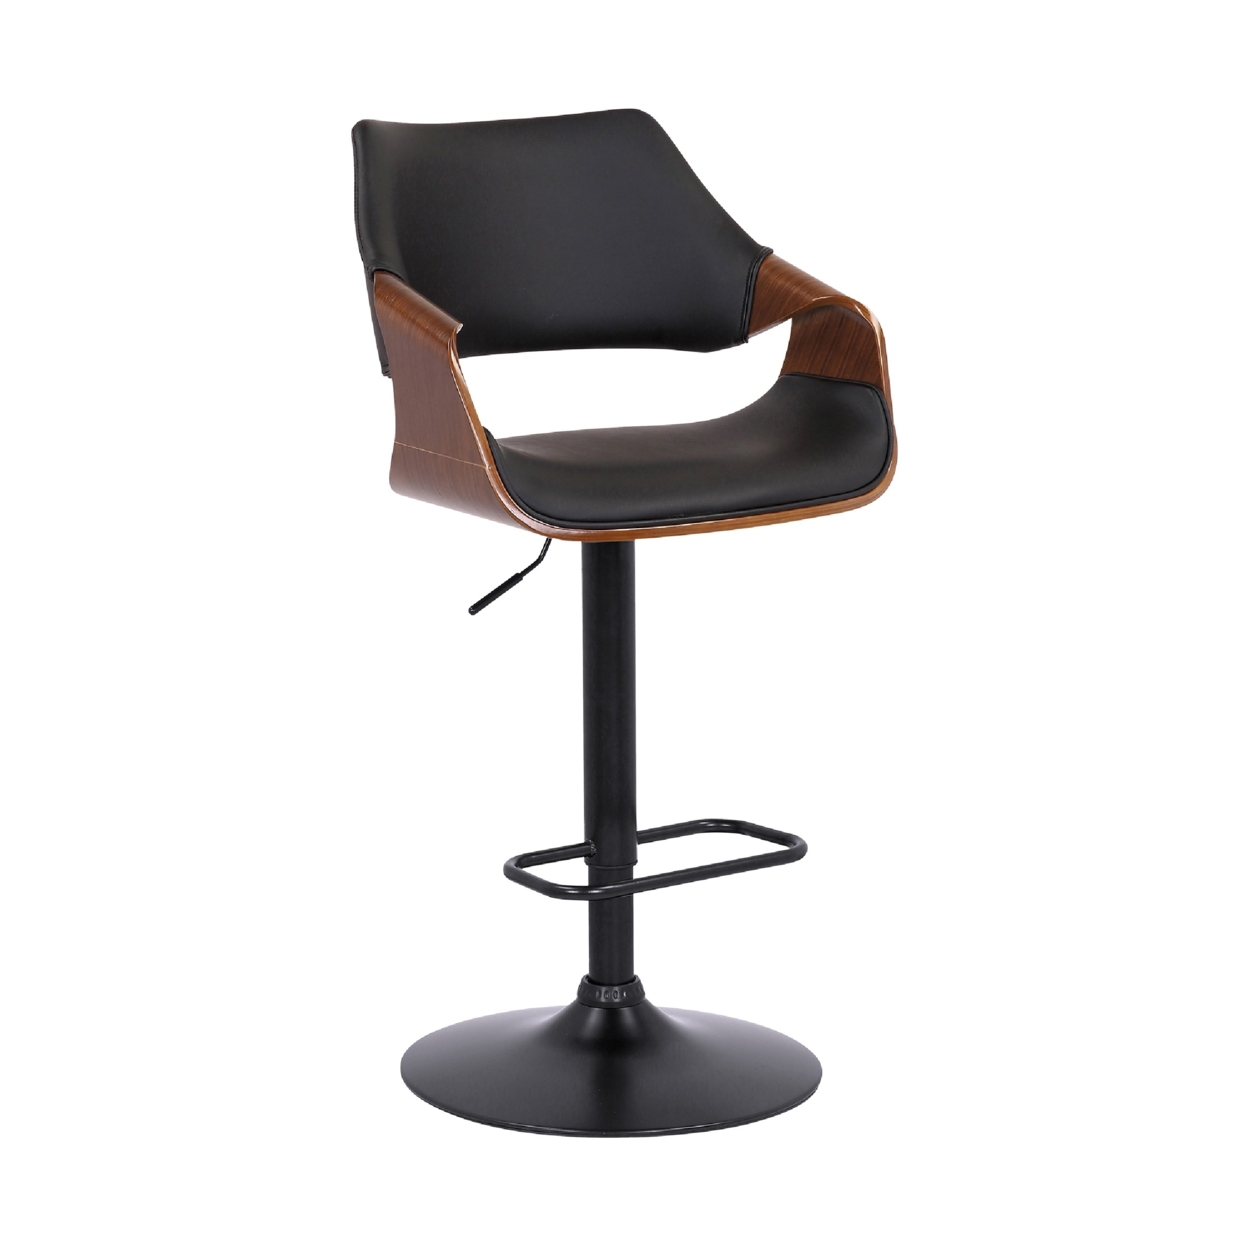 Adjustable Barstool With Faux Leather And Wooden Support, Black- Saltoro Sherpi